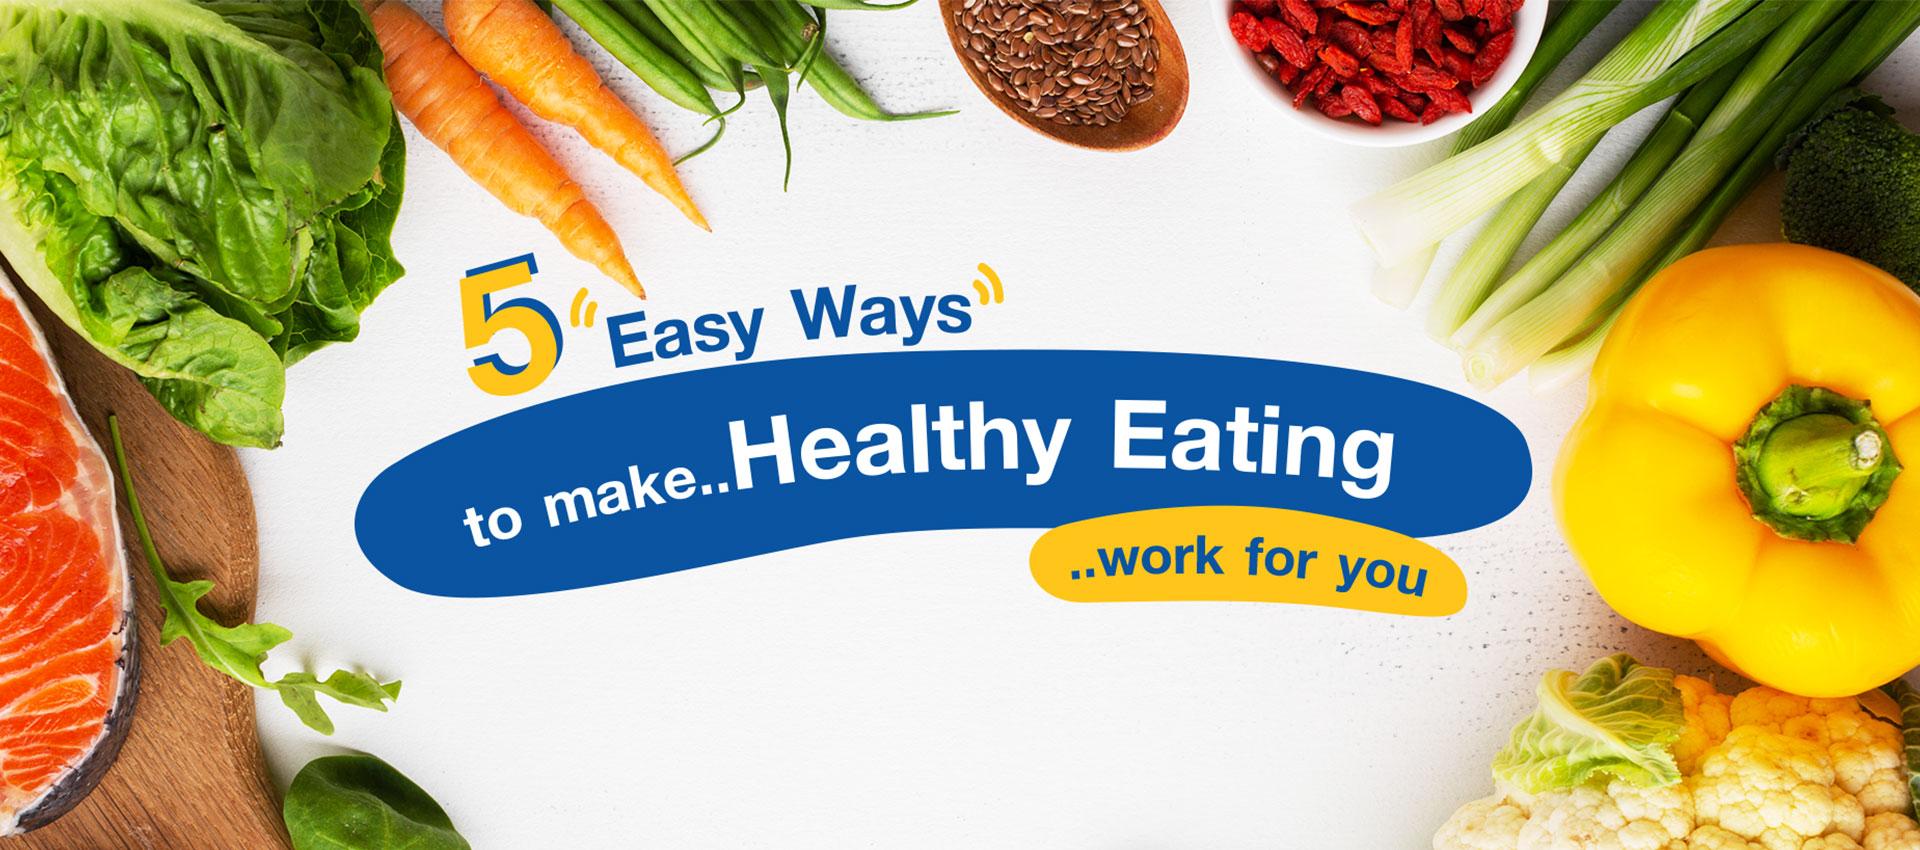 5 easy ways to make healthy eating work for you